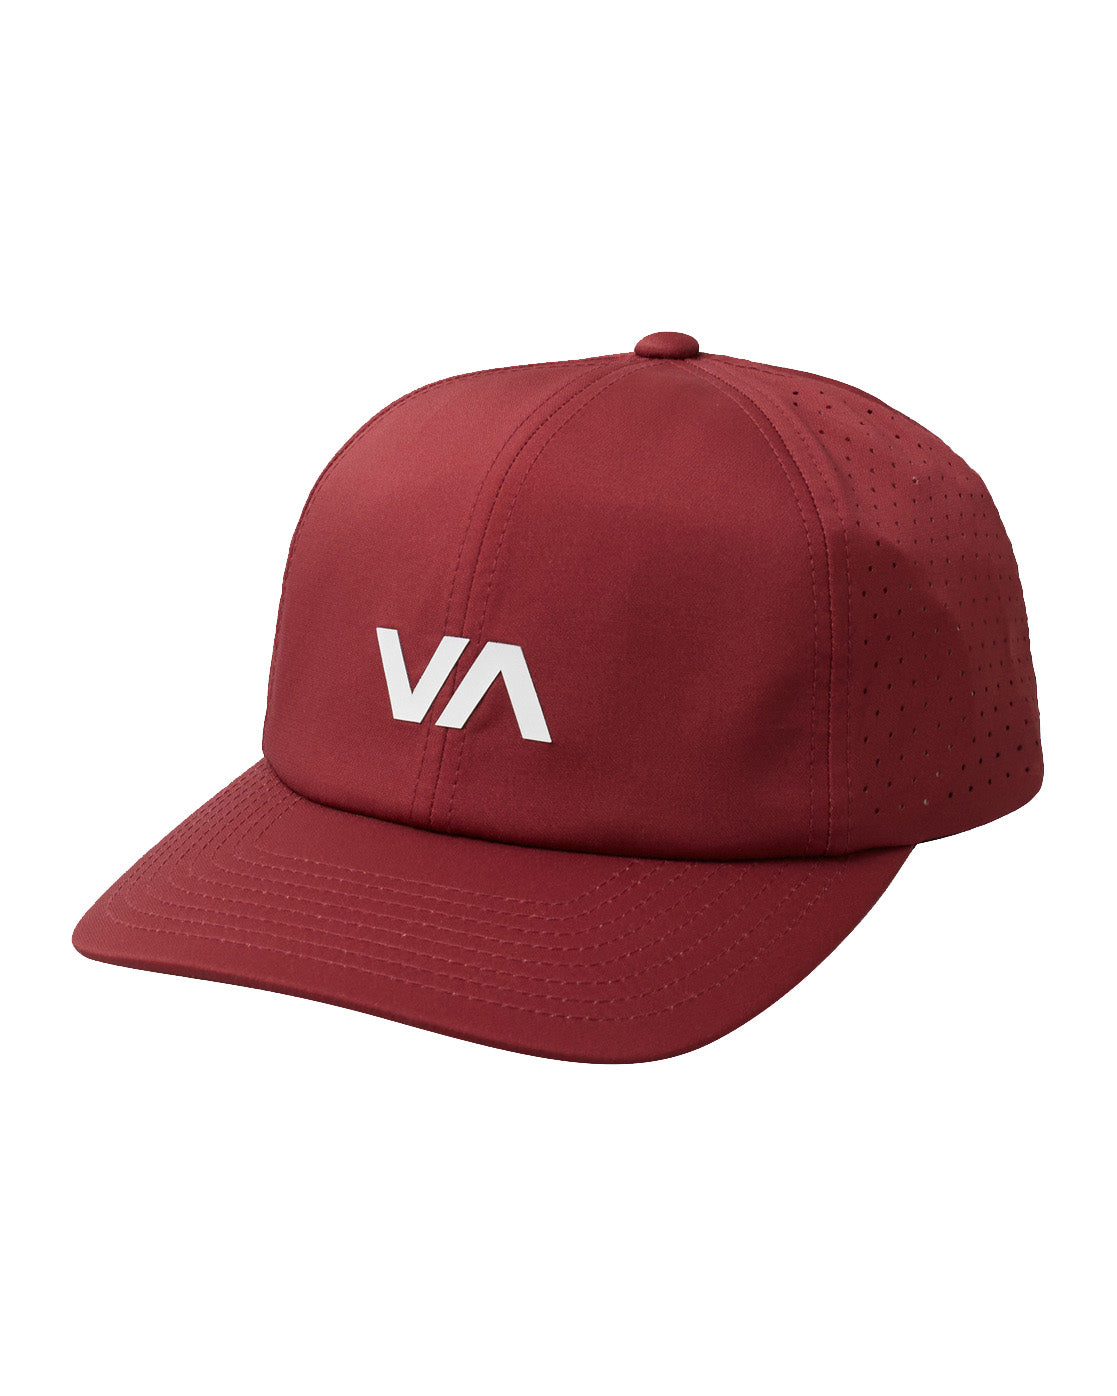 RVCA Vent Perforated Clipback Hat II CAR OS